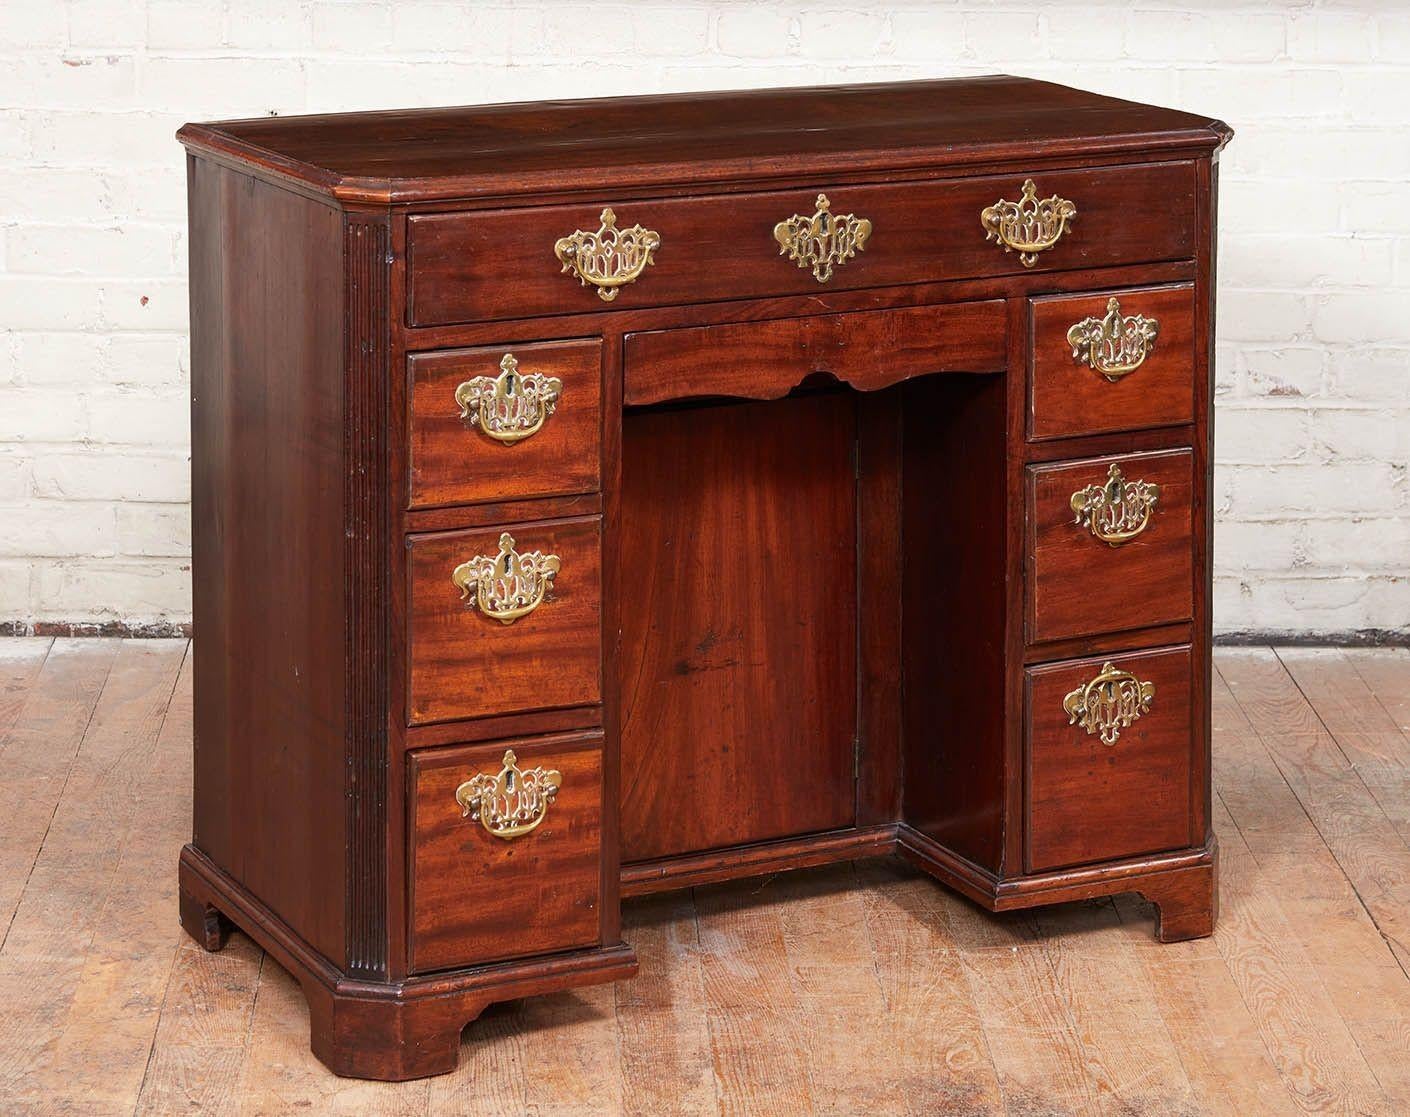 Fine George III period mahogany kneehole desk having richly grained top with canted corners and molded edge, the long drawer flanked by two rows of short drawers with door in recess, the canted corners with fluted rails and standing on original